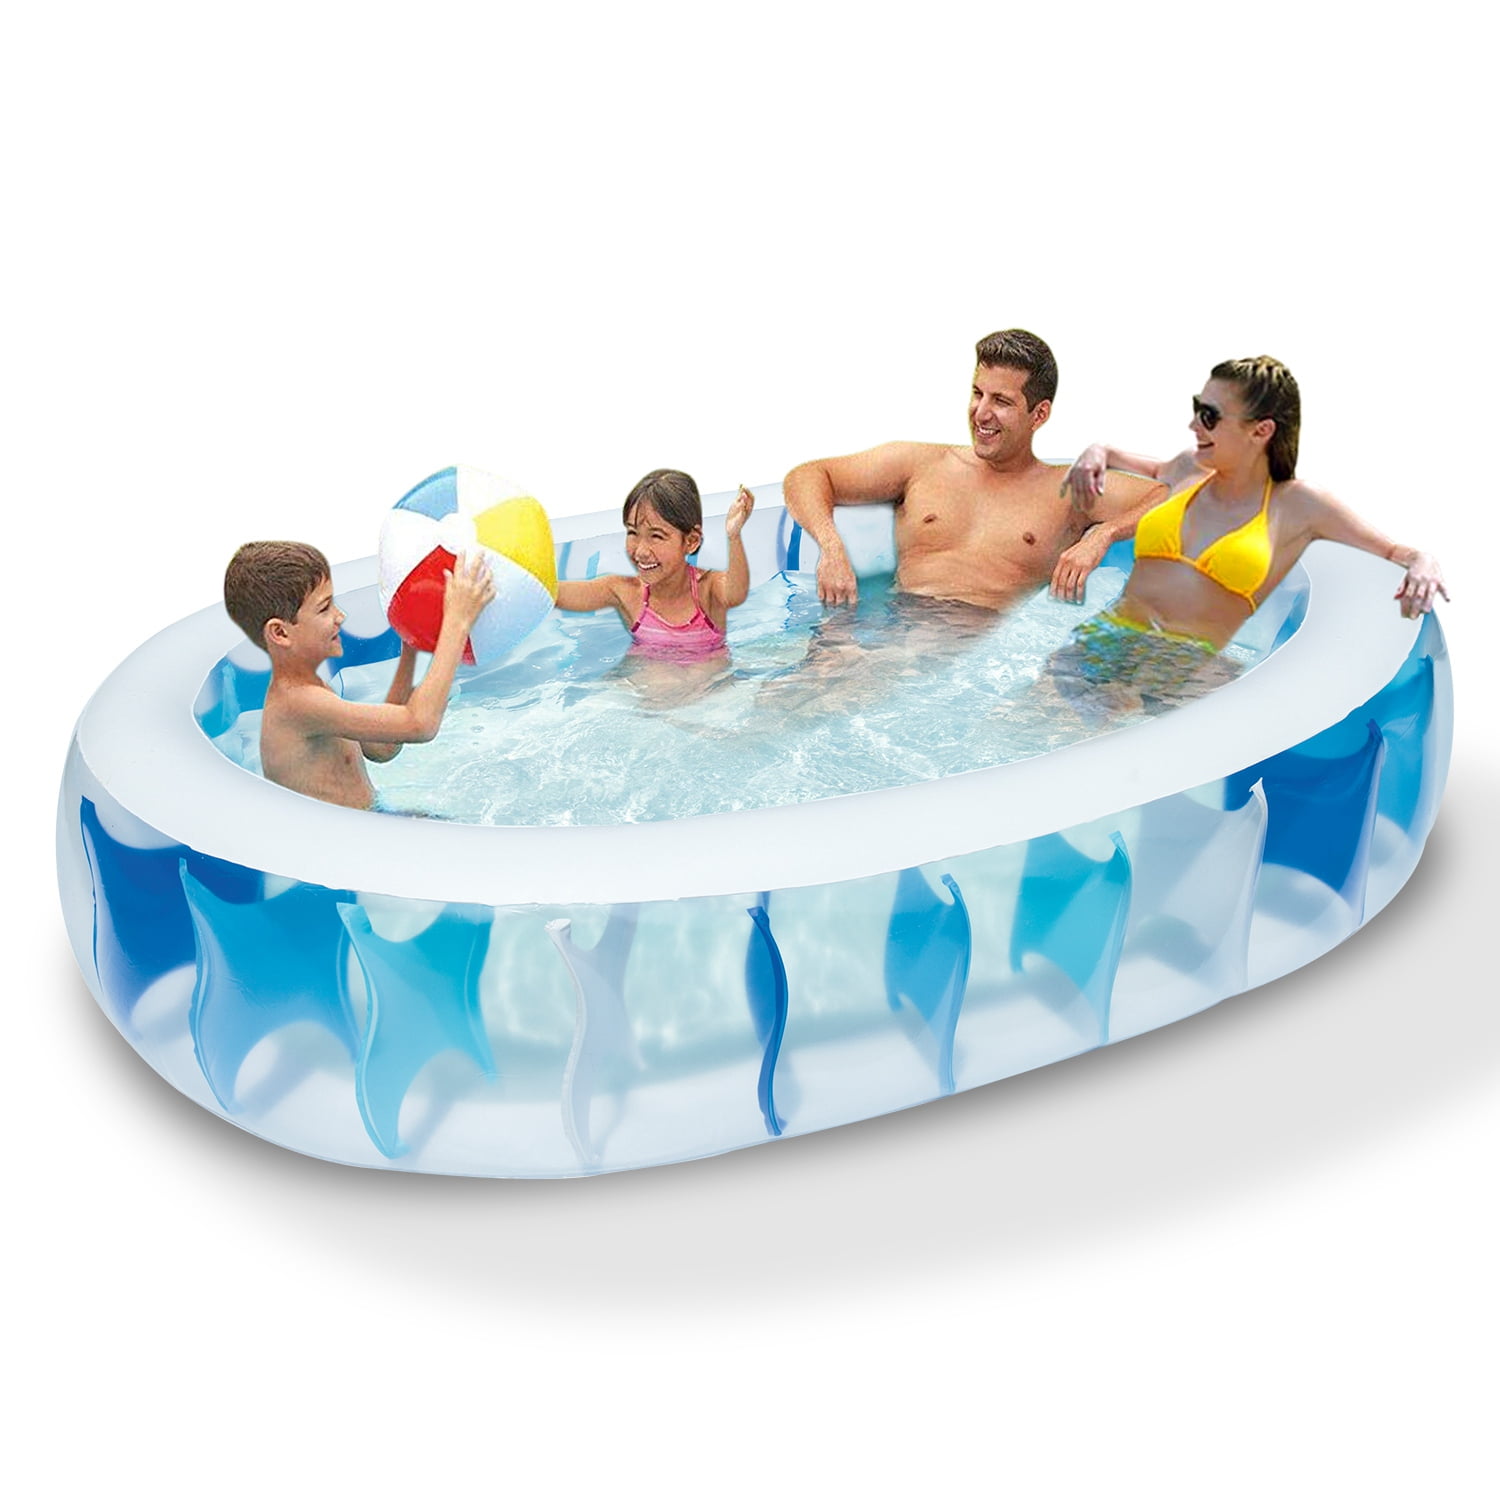 Details about   48"x 48"x 10" Inflatable Swimming Pool Easy Set for 2 Kids Toddlers Summer Play 